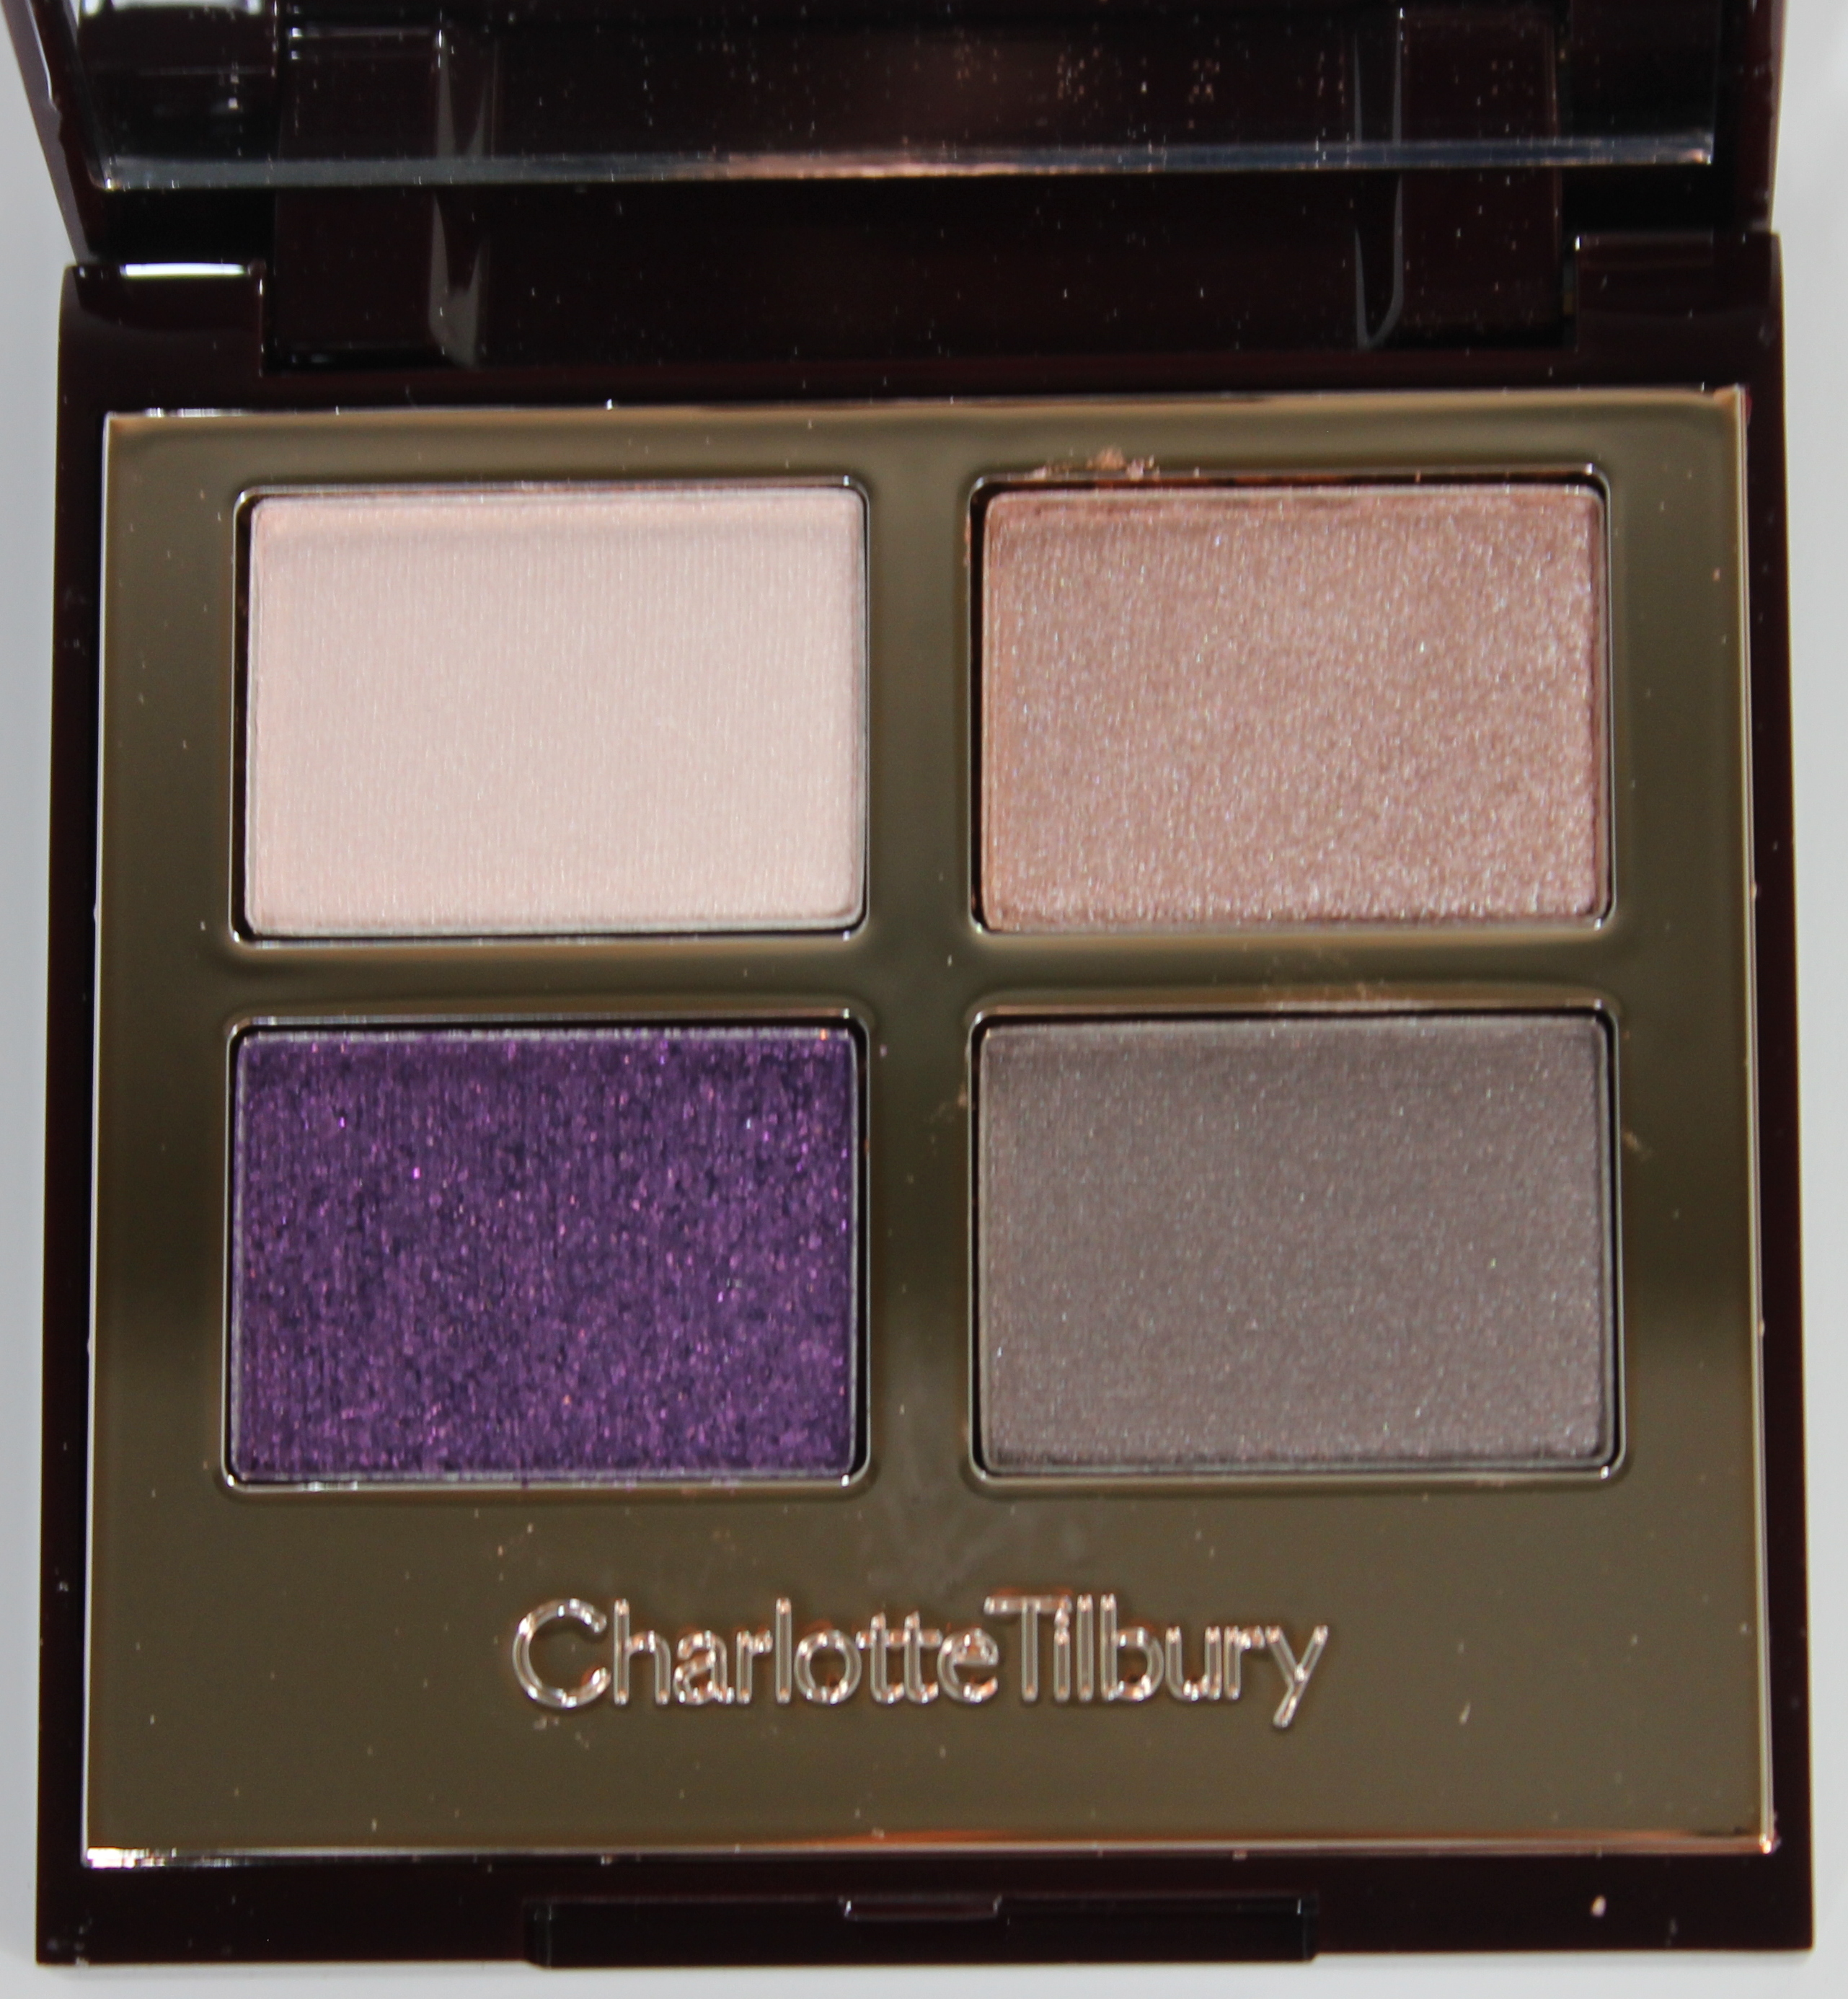 Charlotte Tilbury The Glamour Muse and The Rebel Color-Coded Eyeshadow Palettes graphic